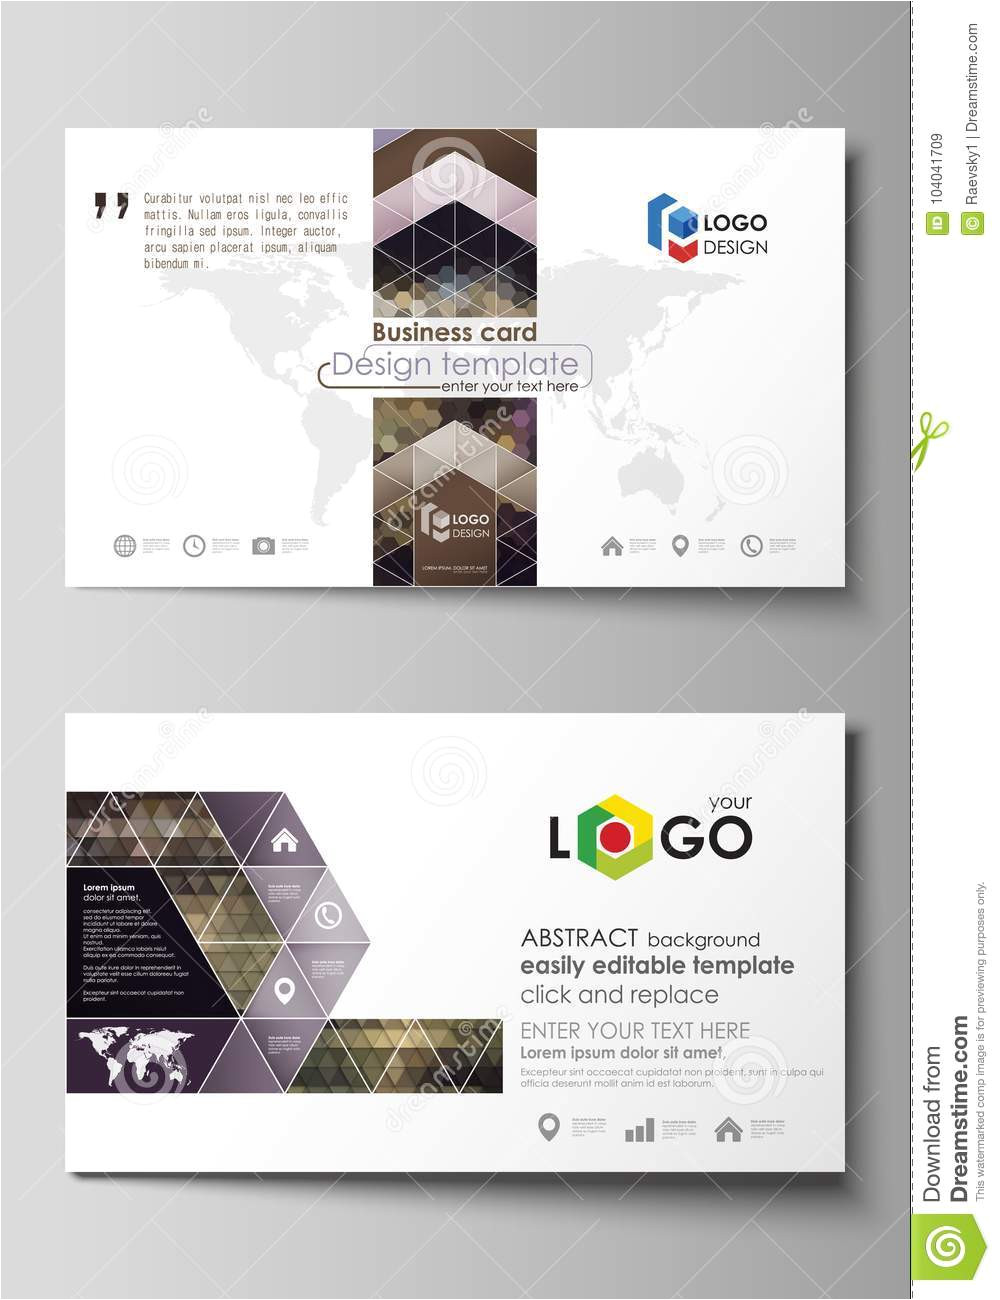 business card templates easy editable layout abstract vector design template multicolored backgrounds geometrical patterns 104041709 jpg